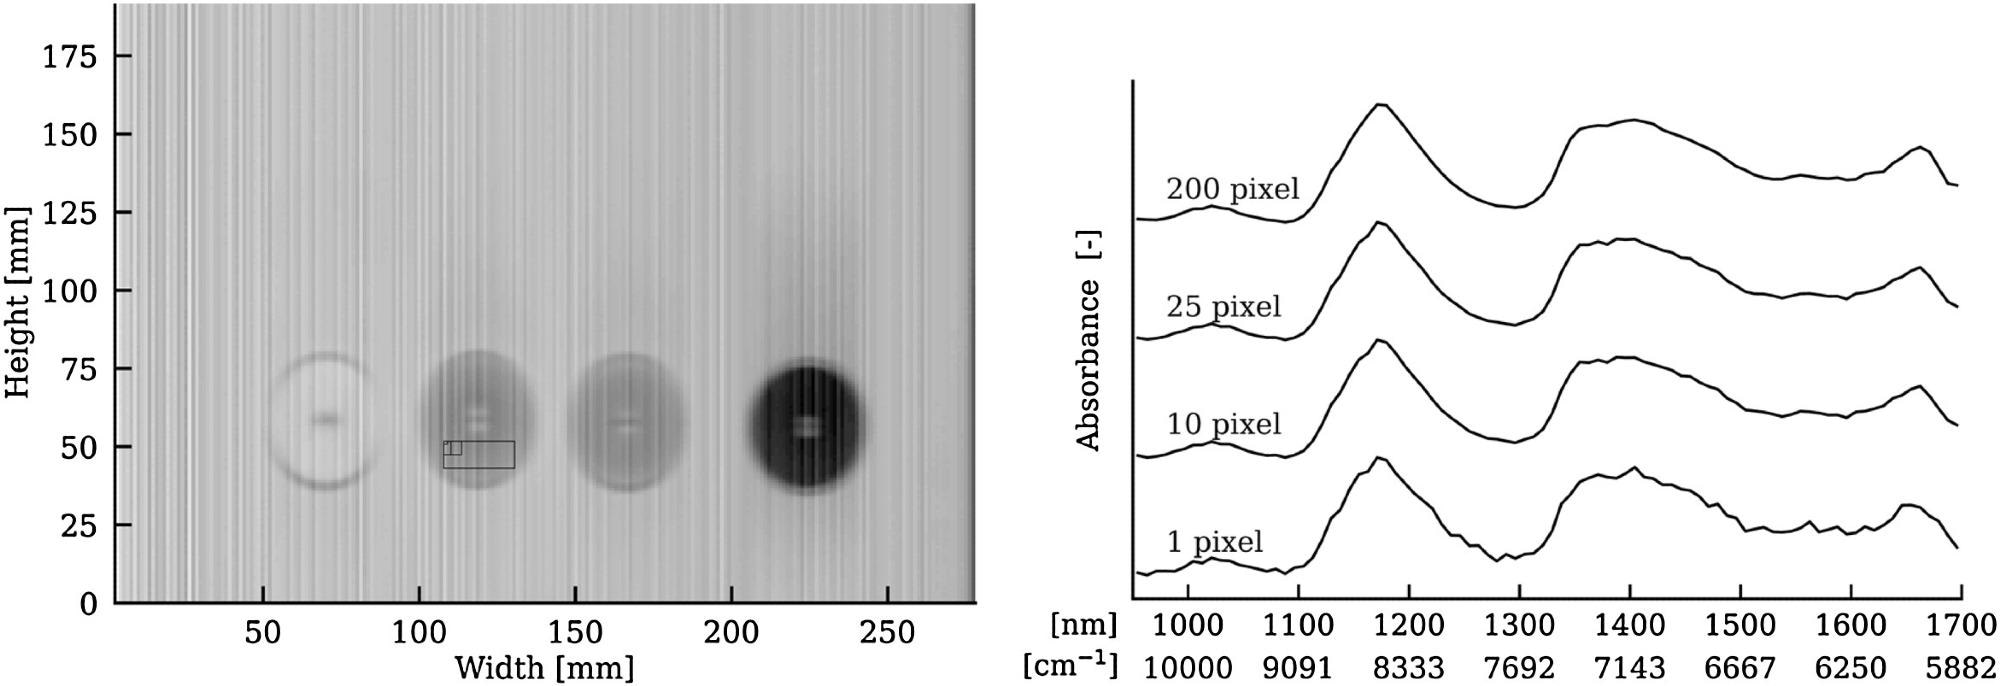 Left, four disks (left to right: PEEK, POM N, POM N, and POM B) presented at 1204 nm and POM N (marked with the area of averaging). Right, hyperspectral spectrum of POM N from scans averaged over 1, 10, 25, and 200 pixels, respectively.